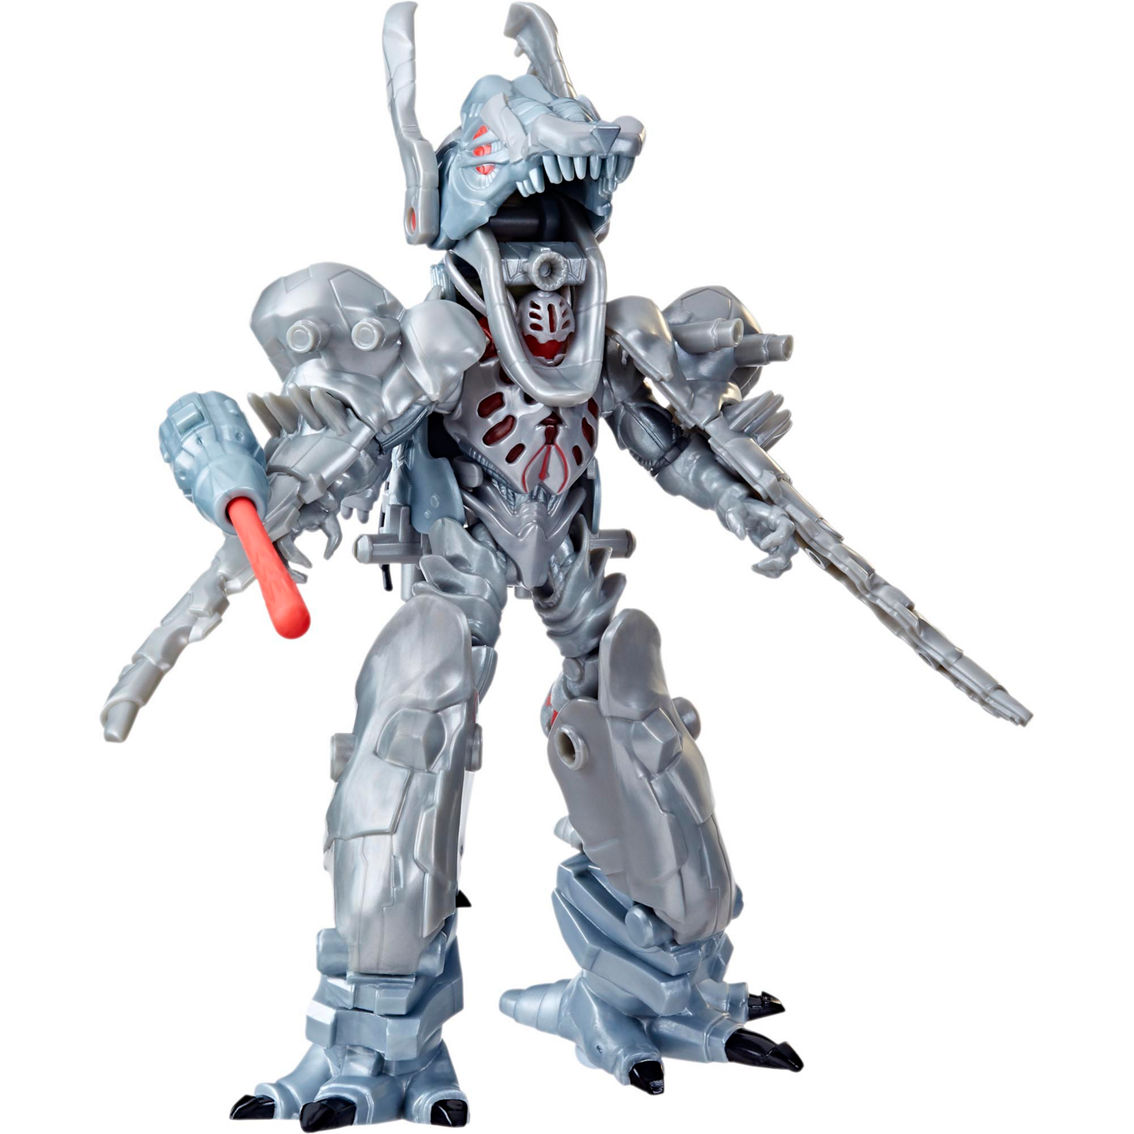 Marvel Mech Strike Mechasaurs Ultron Primeval with T-R3X - Image 2 of 4